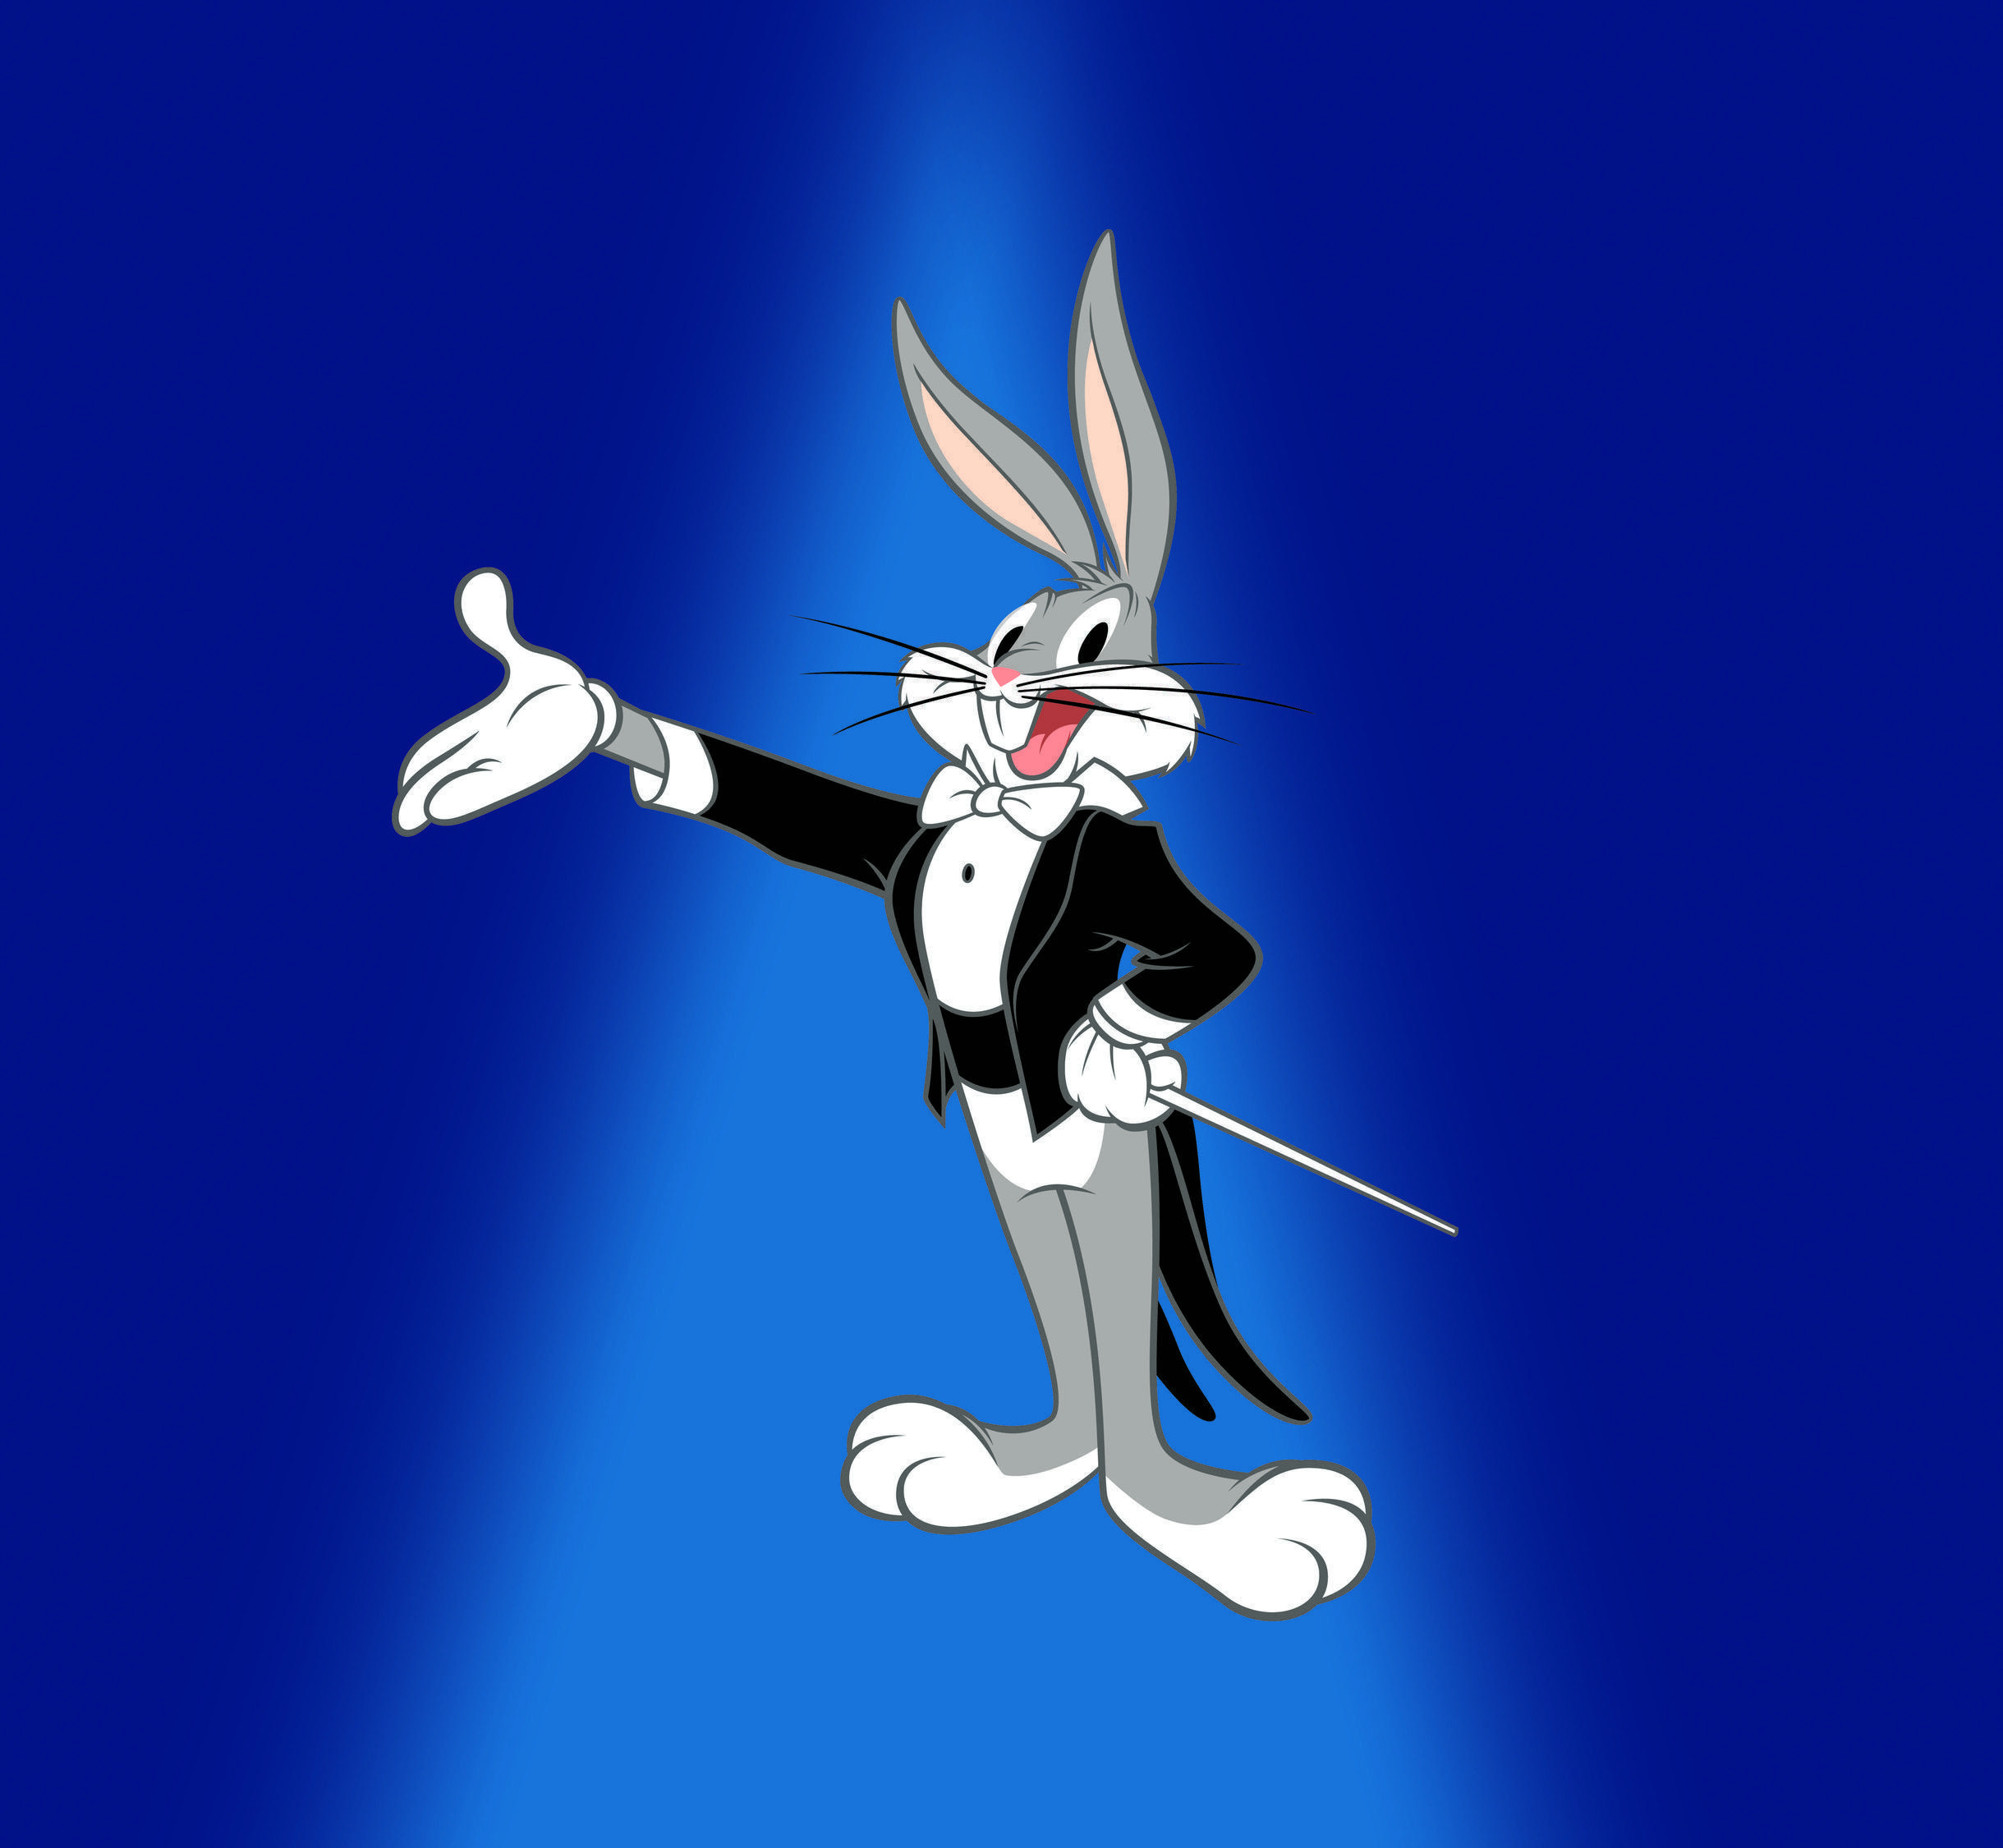 bugs-bunny-background-127157-1691706-9433394.png.